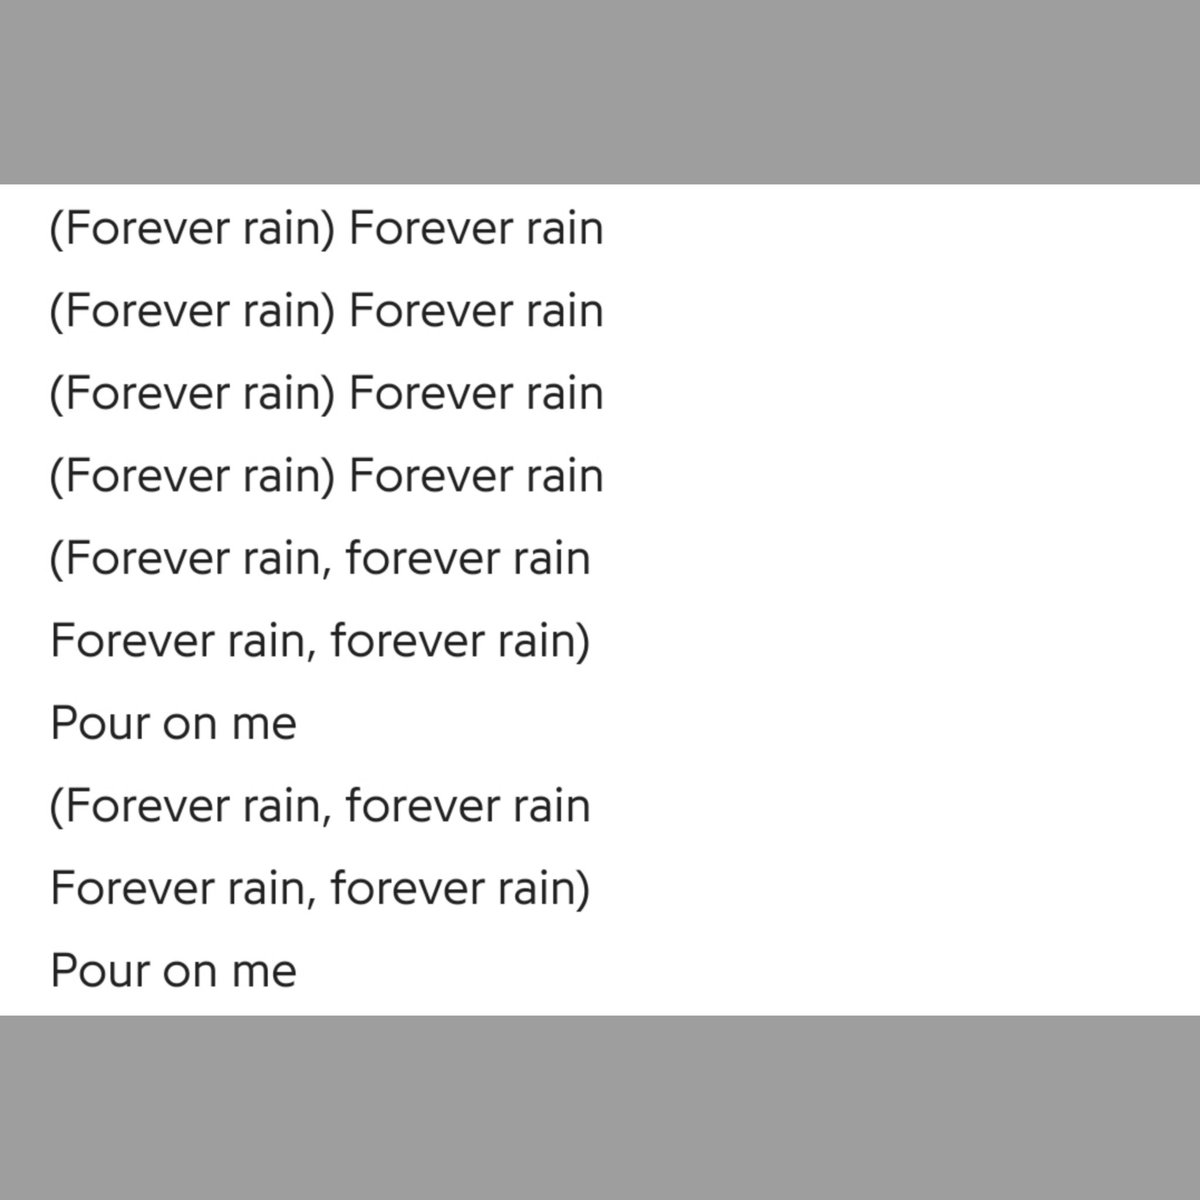 Solace in rain. Joon opens the track w the sound of rainfall, which is smth we hear at the end of 'everythingoes' as well, so perhaps the prev track is transitioning into this which makes v much sense considering how this track n the album as a whole ends w "pour on me"- Maybe+